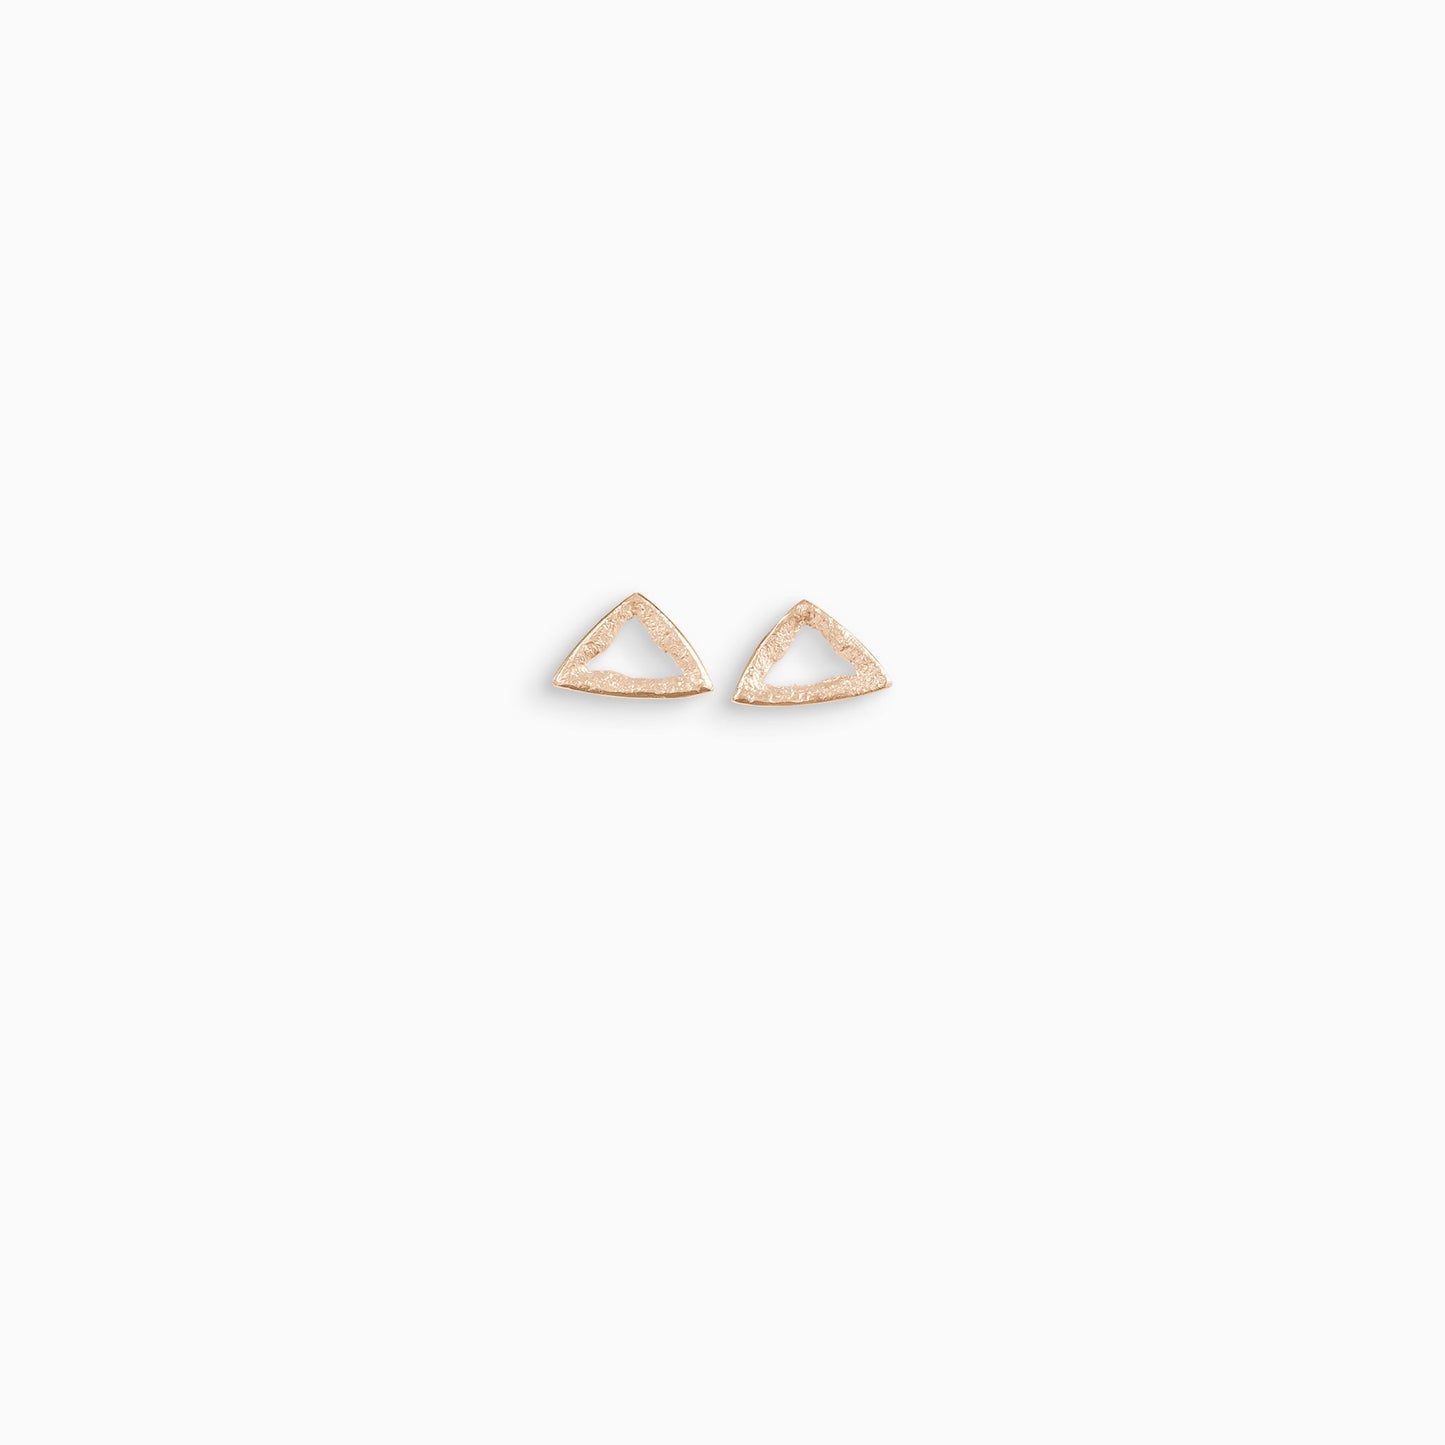 A pair of 18ct Fairtrade rose gold stud earrings, triangular in form with an open centre. Strong organic texture. Smooth outside edge, fragmented inside edges. 14mm x 14mm x14mm 